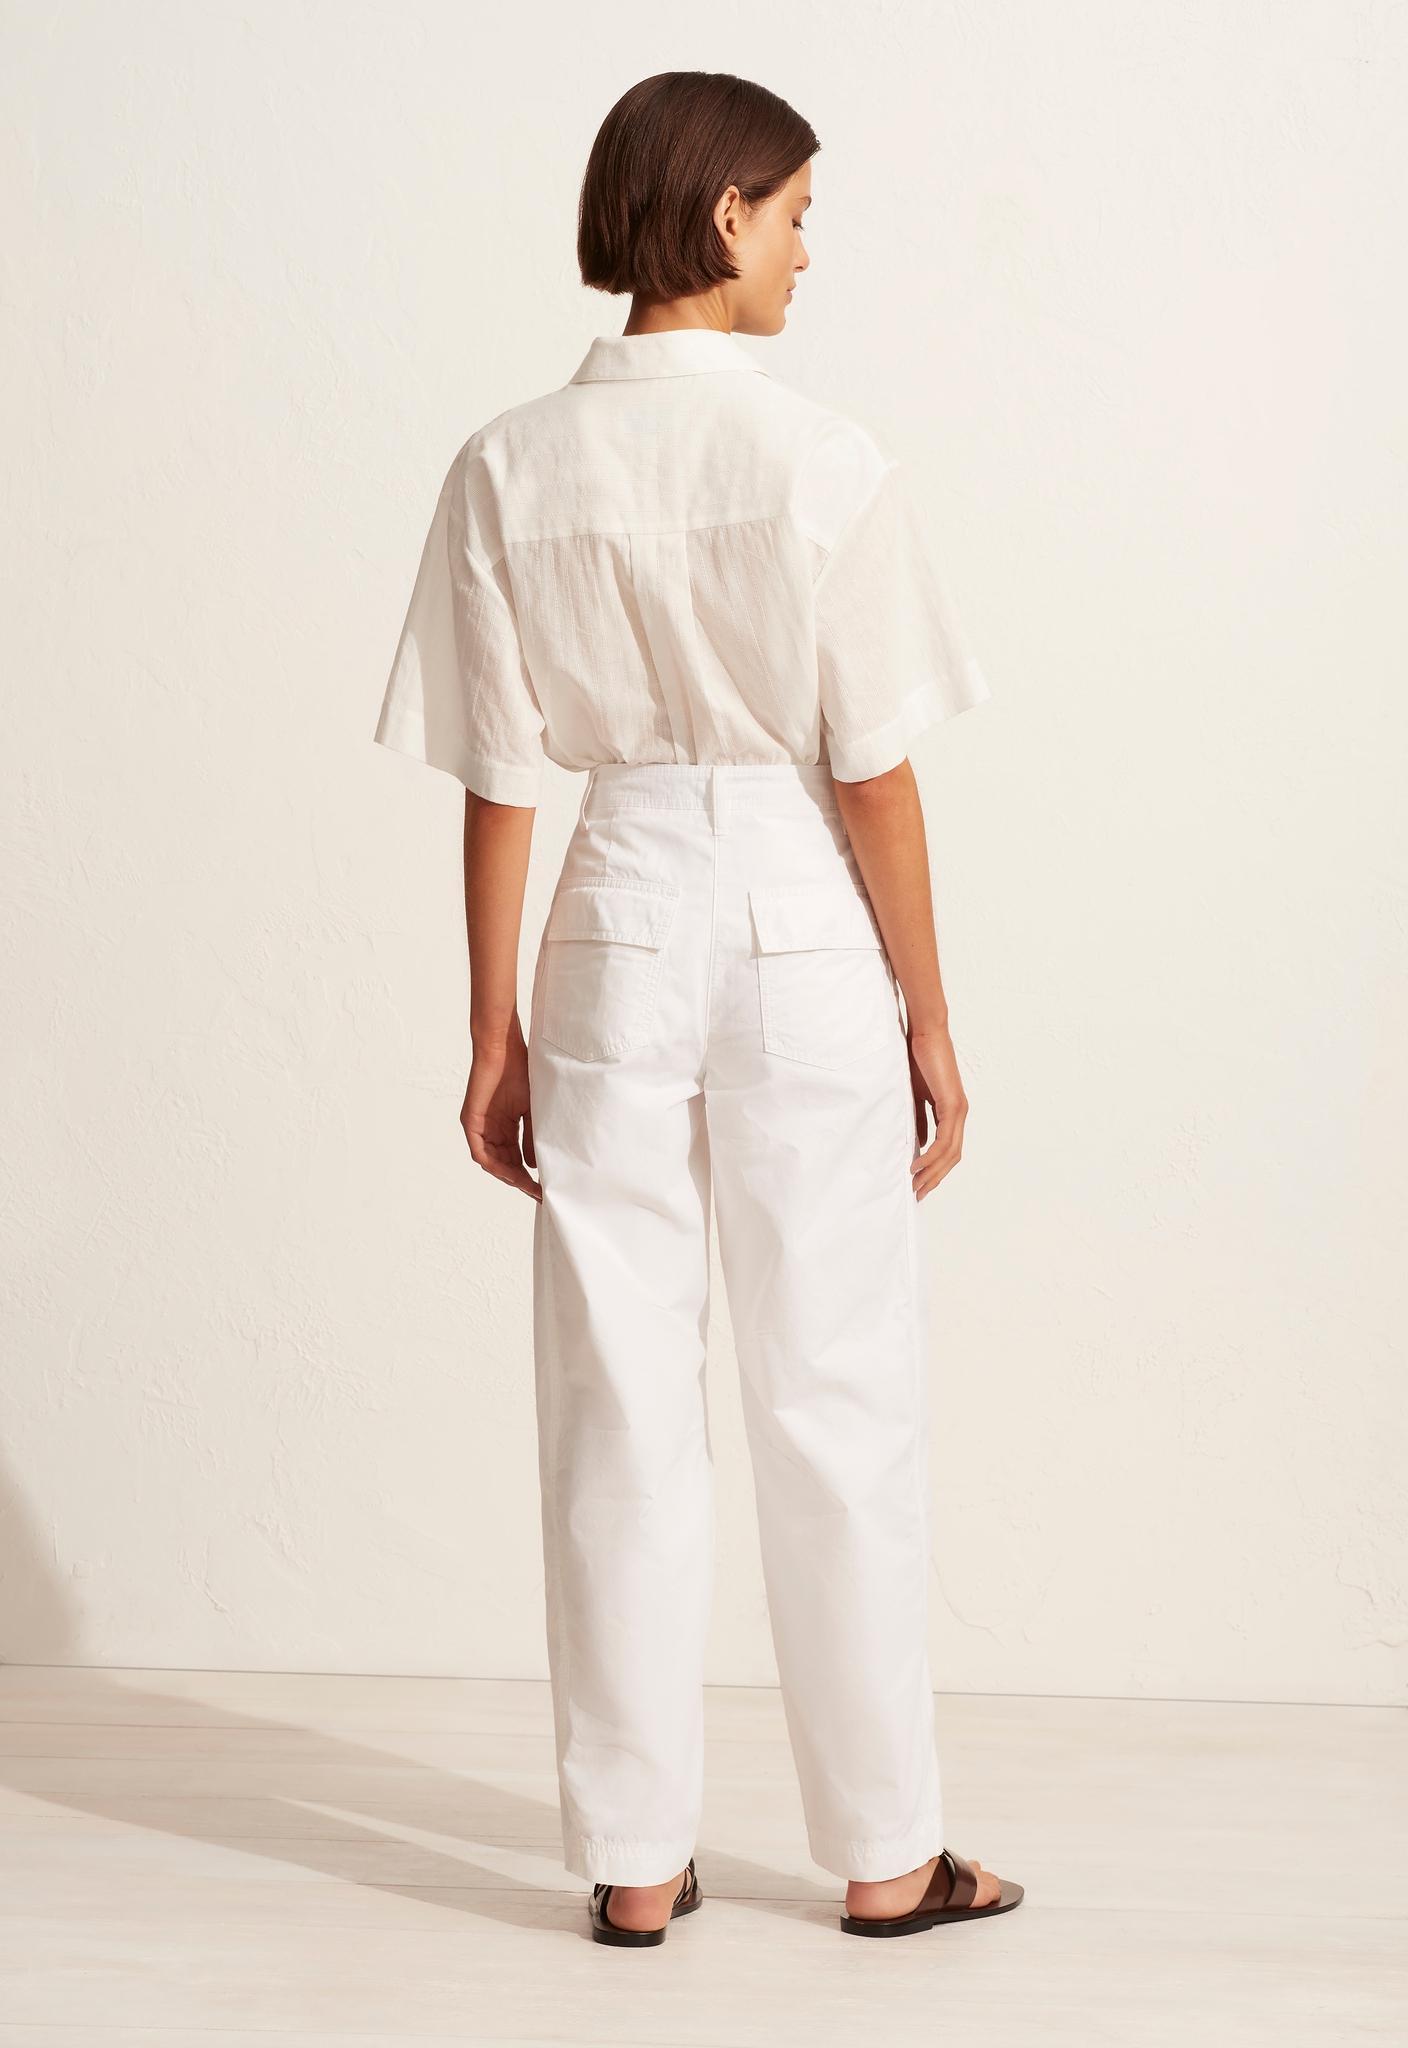 Relaxed Cargo Pant White - Matteau